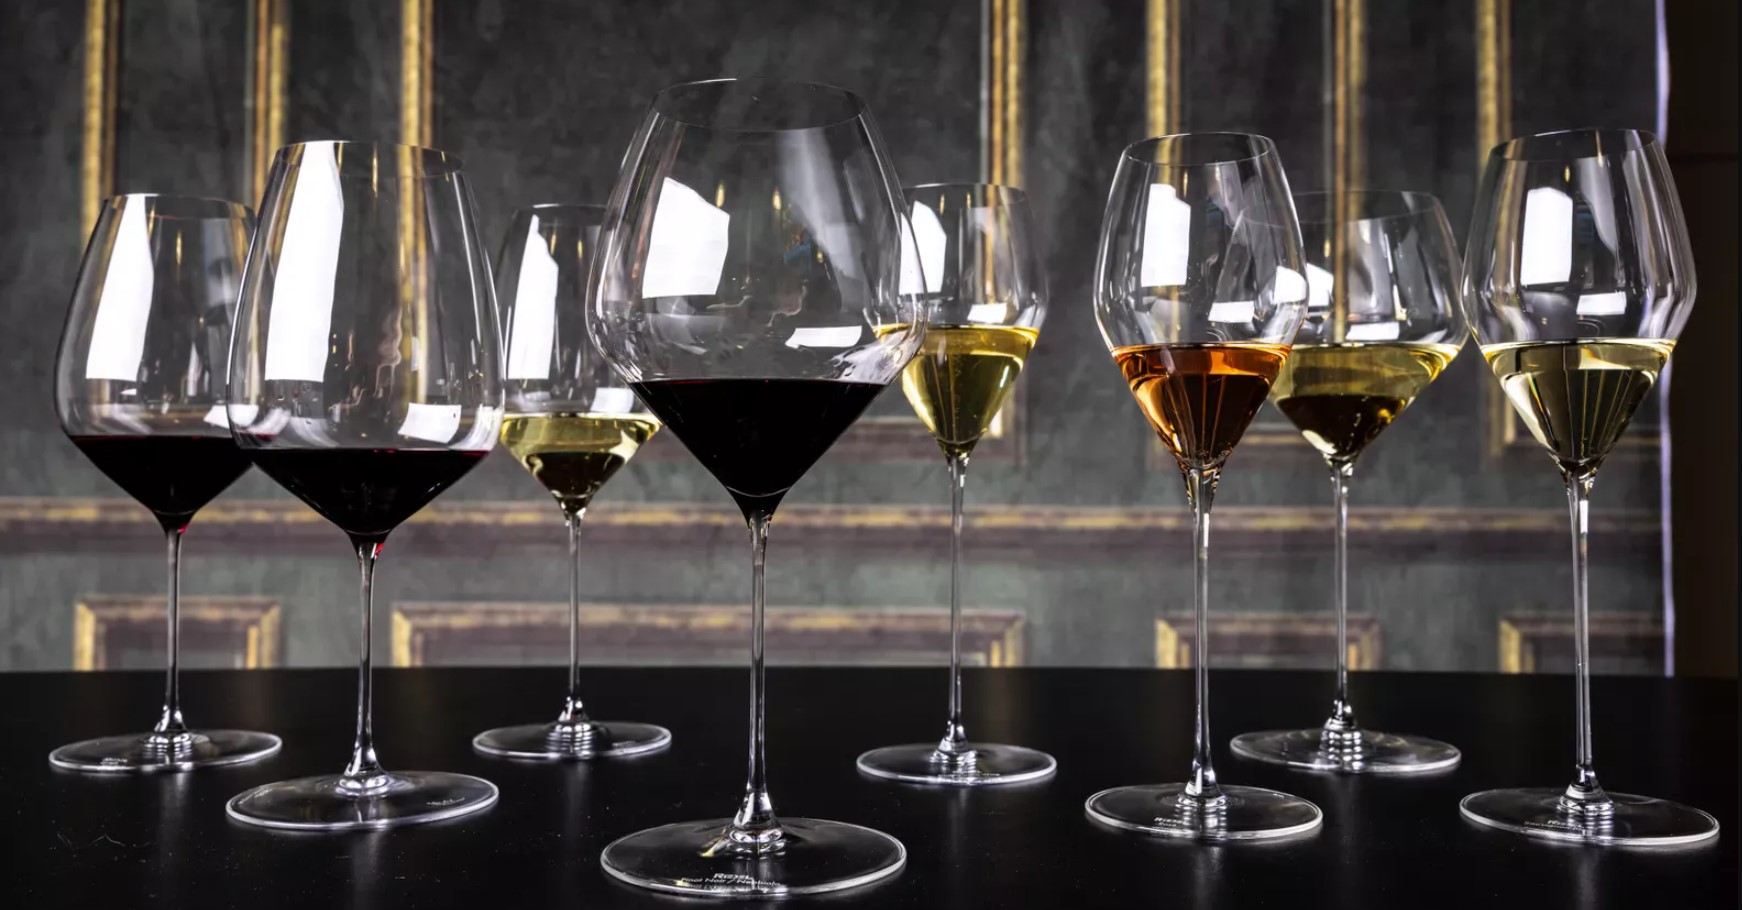 Image of various Riedel wine glasses on the table